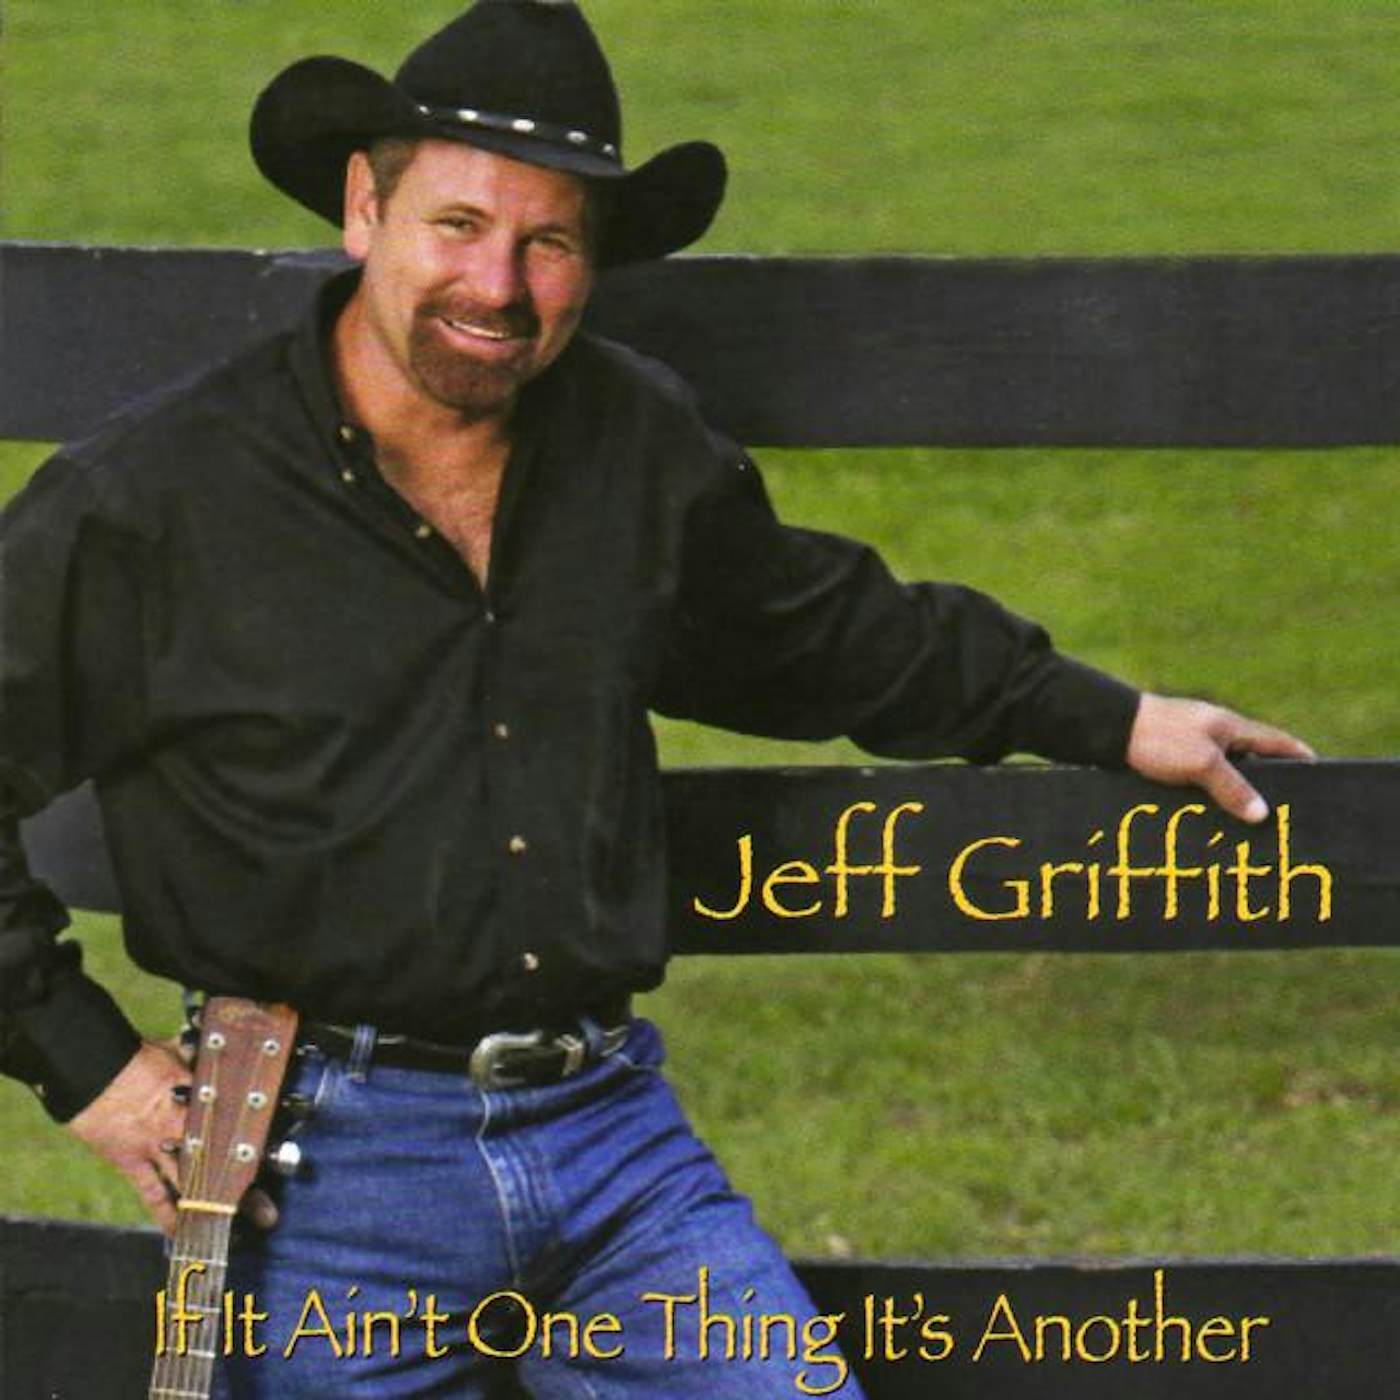 Jeff Griffith